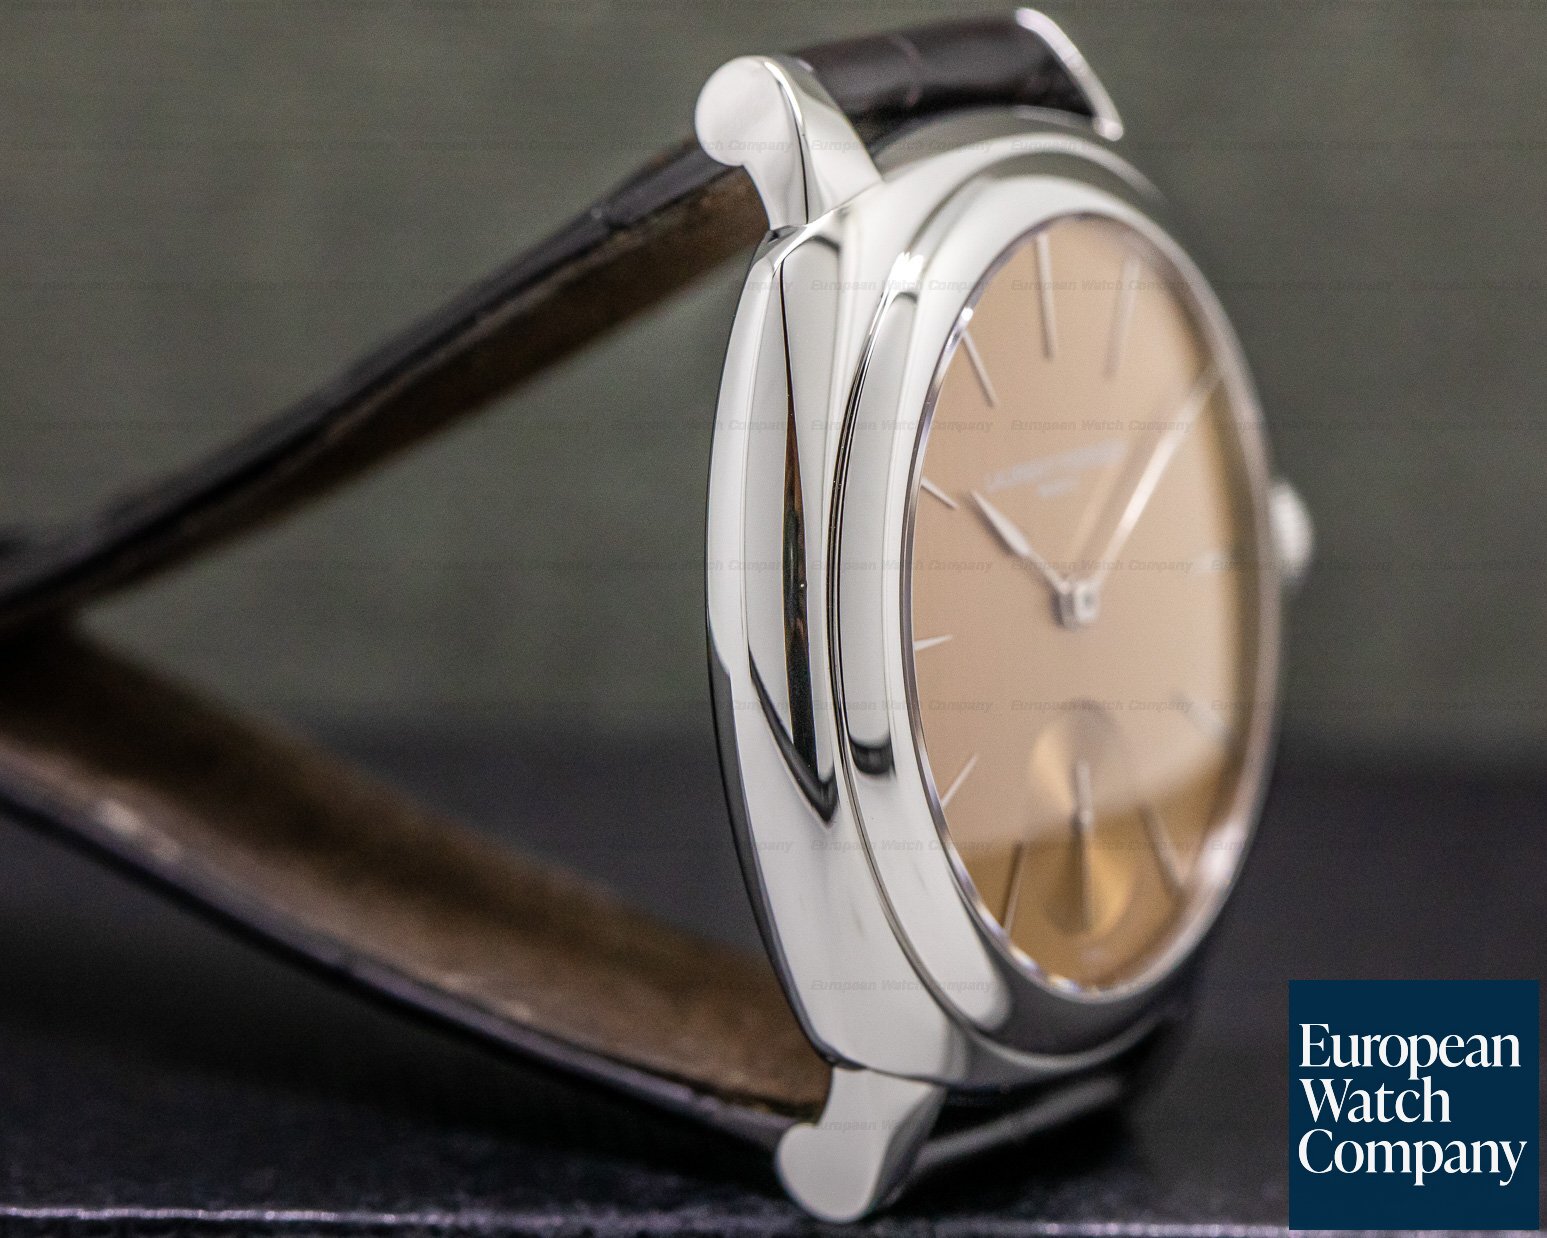 Laurent Ferrier Galet Square Micro-Rotor SS Autumn Dial Ref. LCF013.AC.RG1